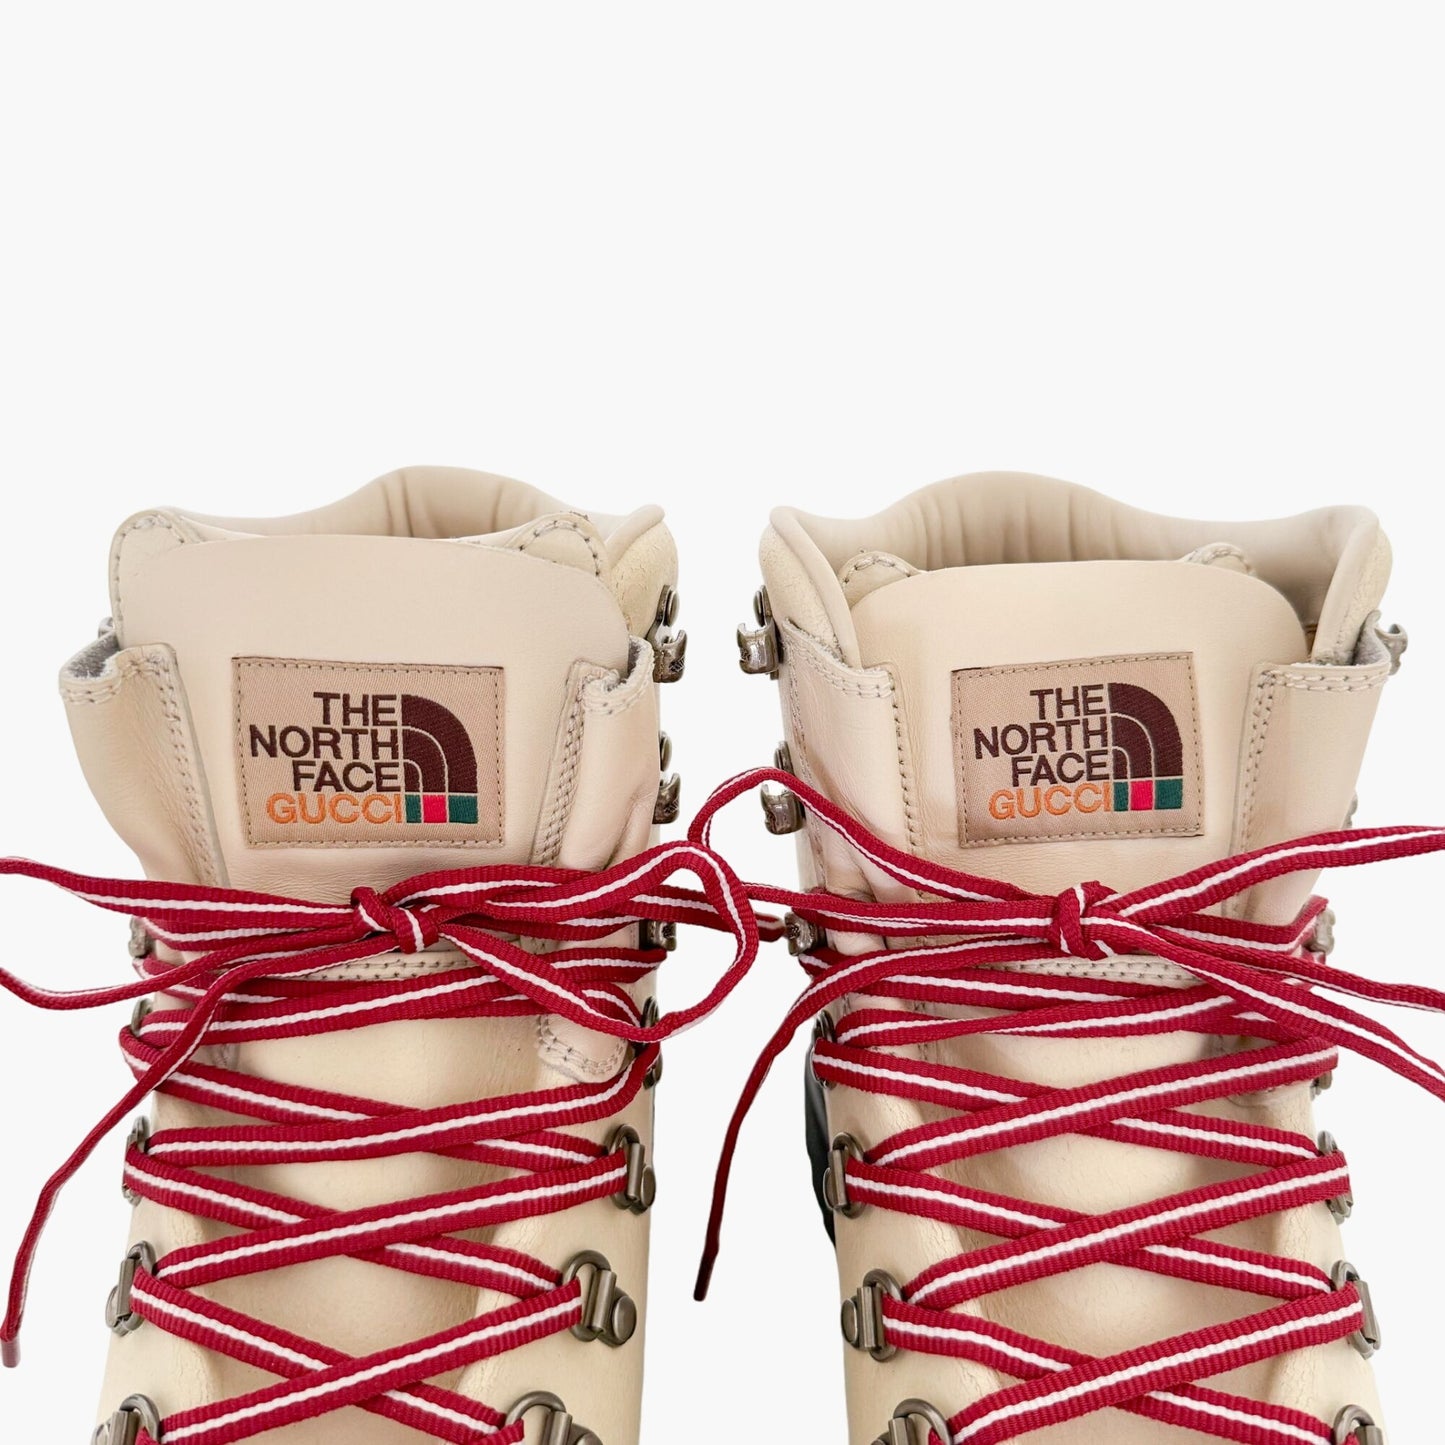 Gucci x The North Face Lace Up Hiking Boots in White/Cream Size 39